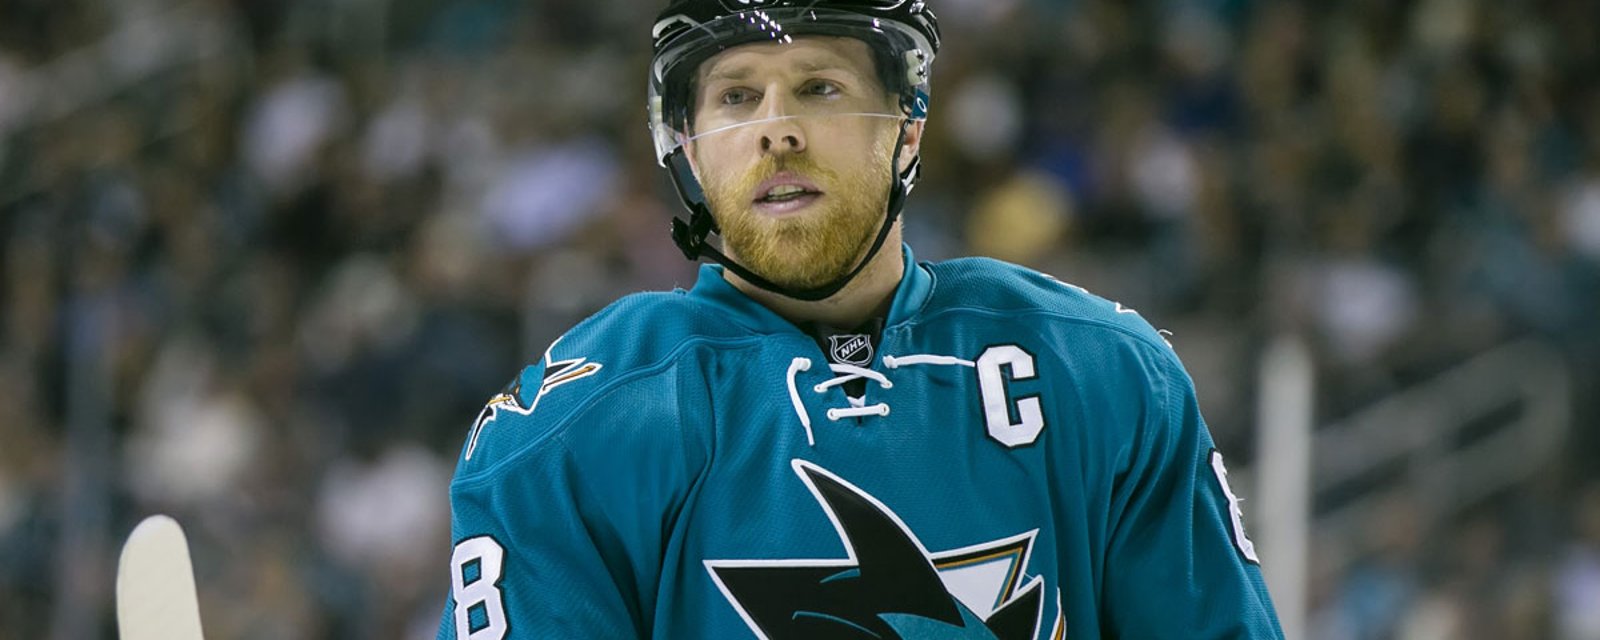 BREAKING: Sharks may be without Pavelski